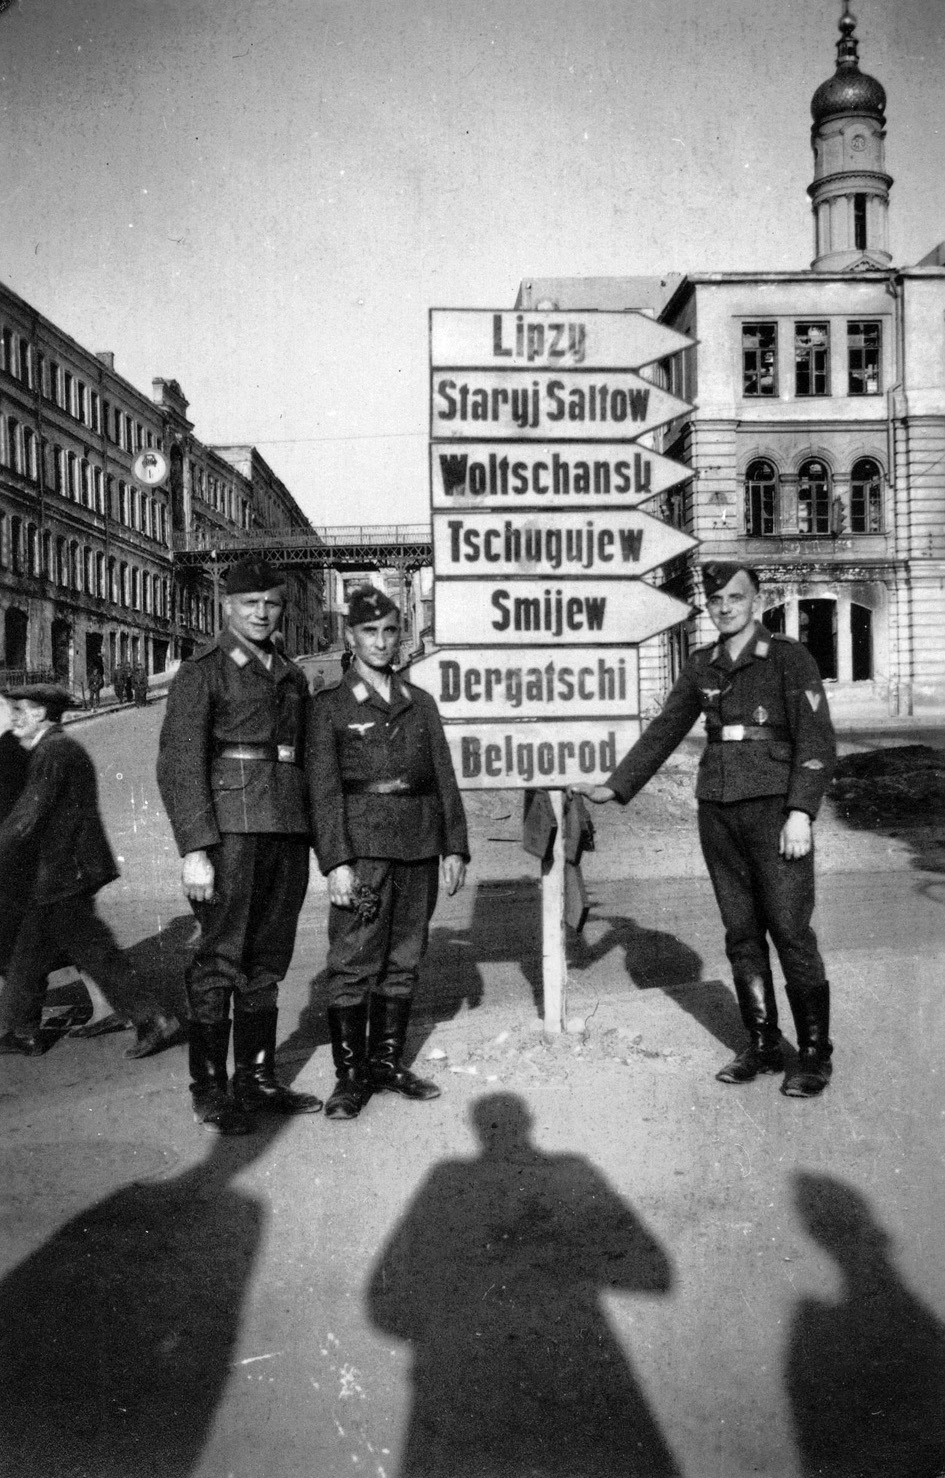 Three Luftwaffe soldiers pose in Belgorod in front of one of many large directional signs that were commonplace in Russian cities. The city was recaptured by Soviet forces in August 1943, losing some 50,000 troops, while Germany lost some 20,000 men including 6,000 Hitler Youth. 